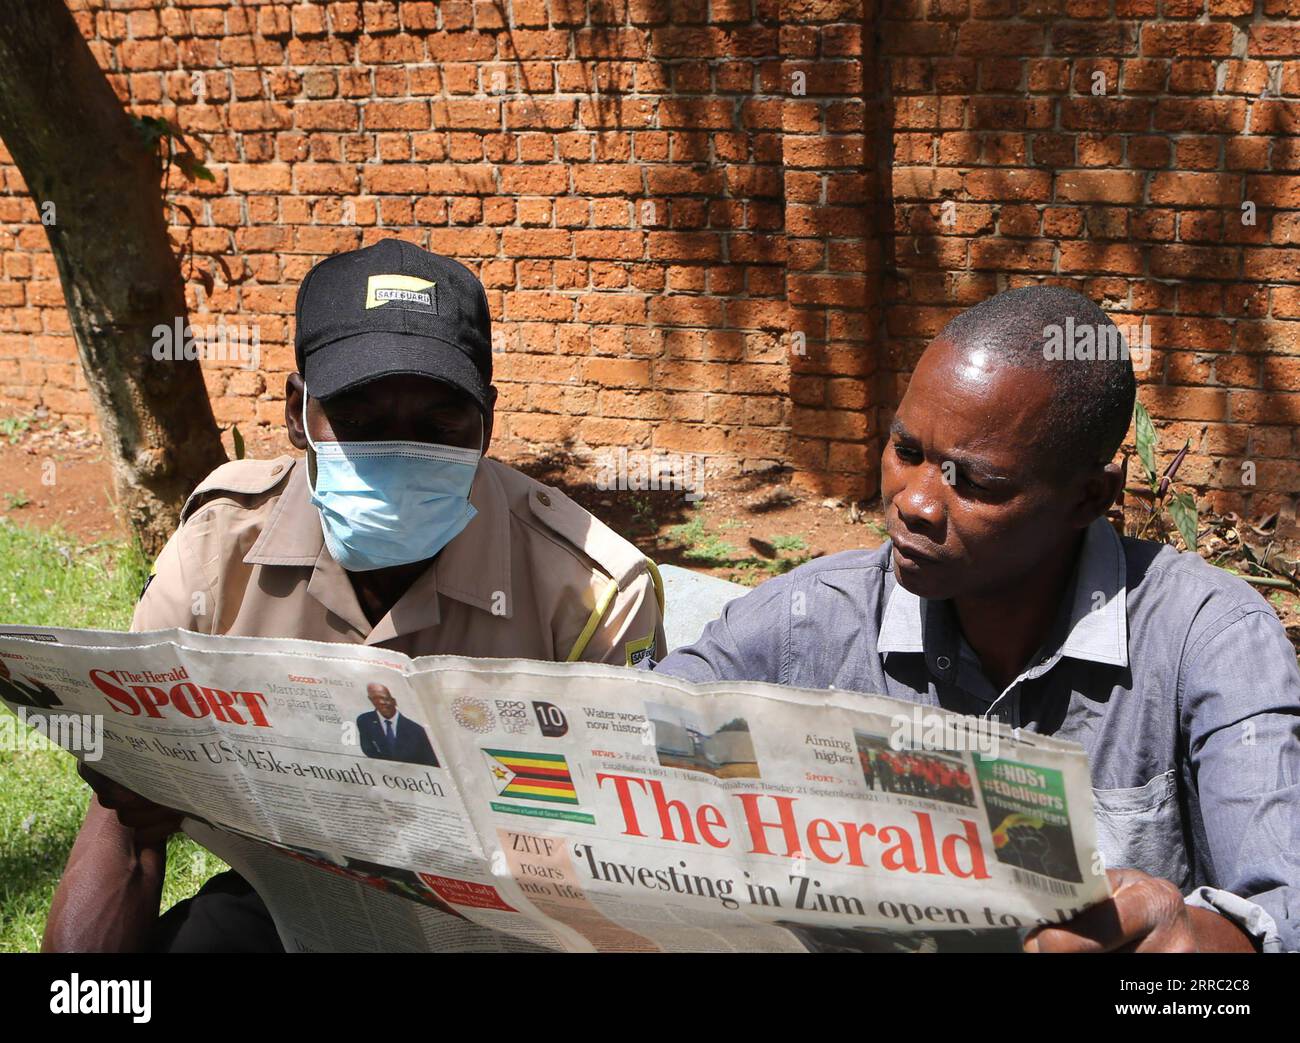 211014 -- HARARE, Oct. 14, 2021 -- Local residents read The Herald in Harare, Zimbabwe, Oct. 14, 2021.  Xinhua Headlines: 1,000 USD per fake news report -- U.S. plot to discredit Chinese investments exposed by Zimbabwean daily ZhangxYuliang PUBLICATIONxNOTxINxCHN Stock Photo